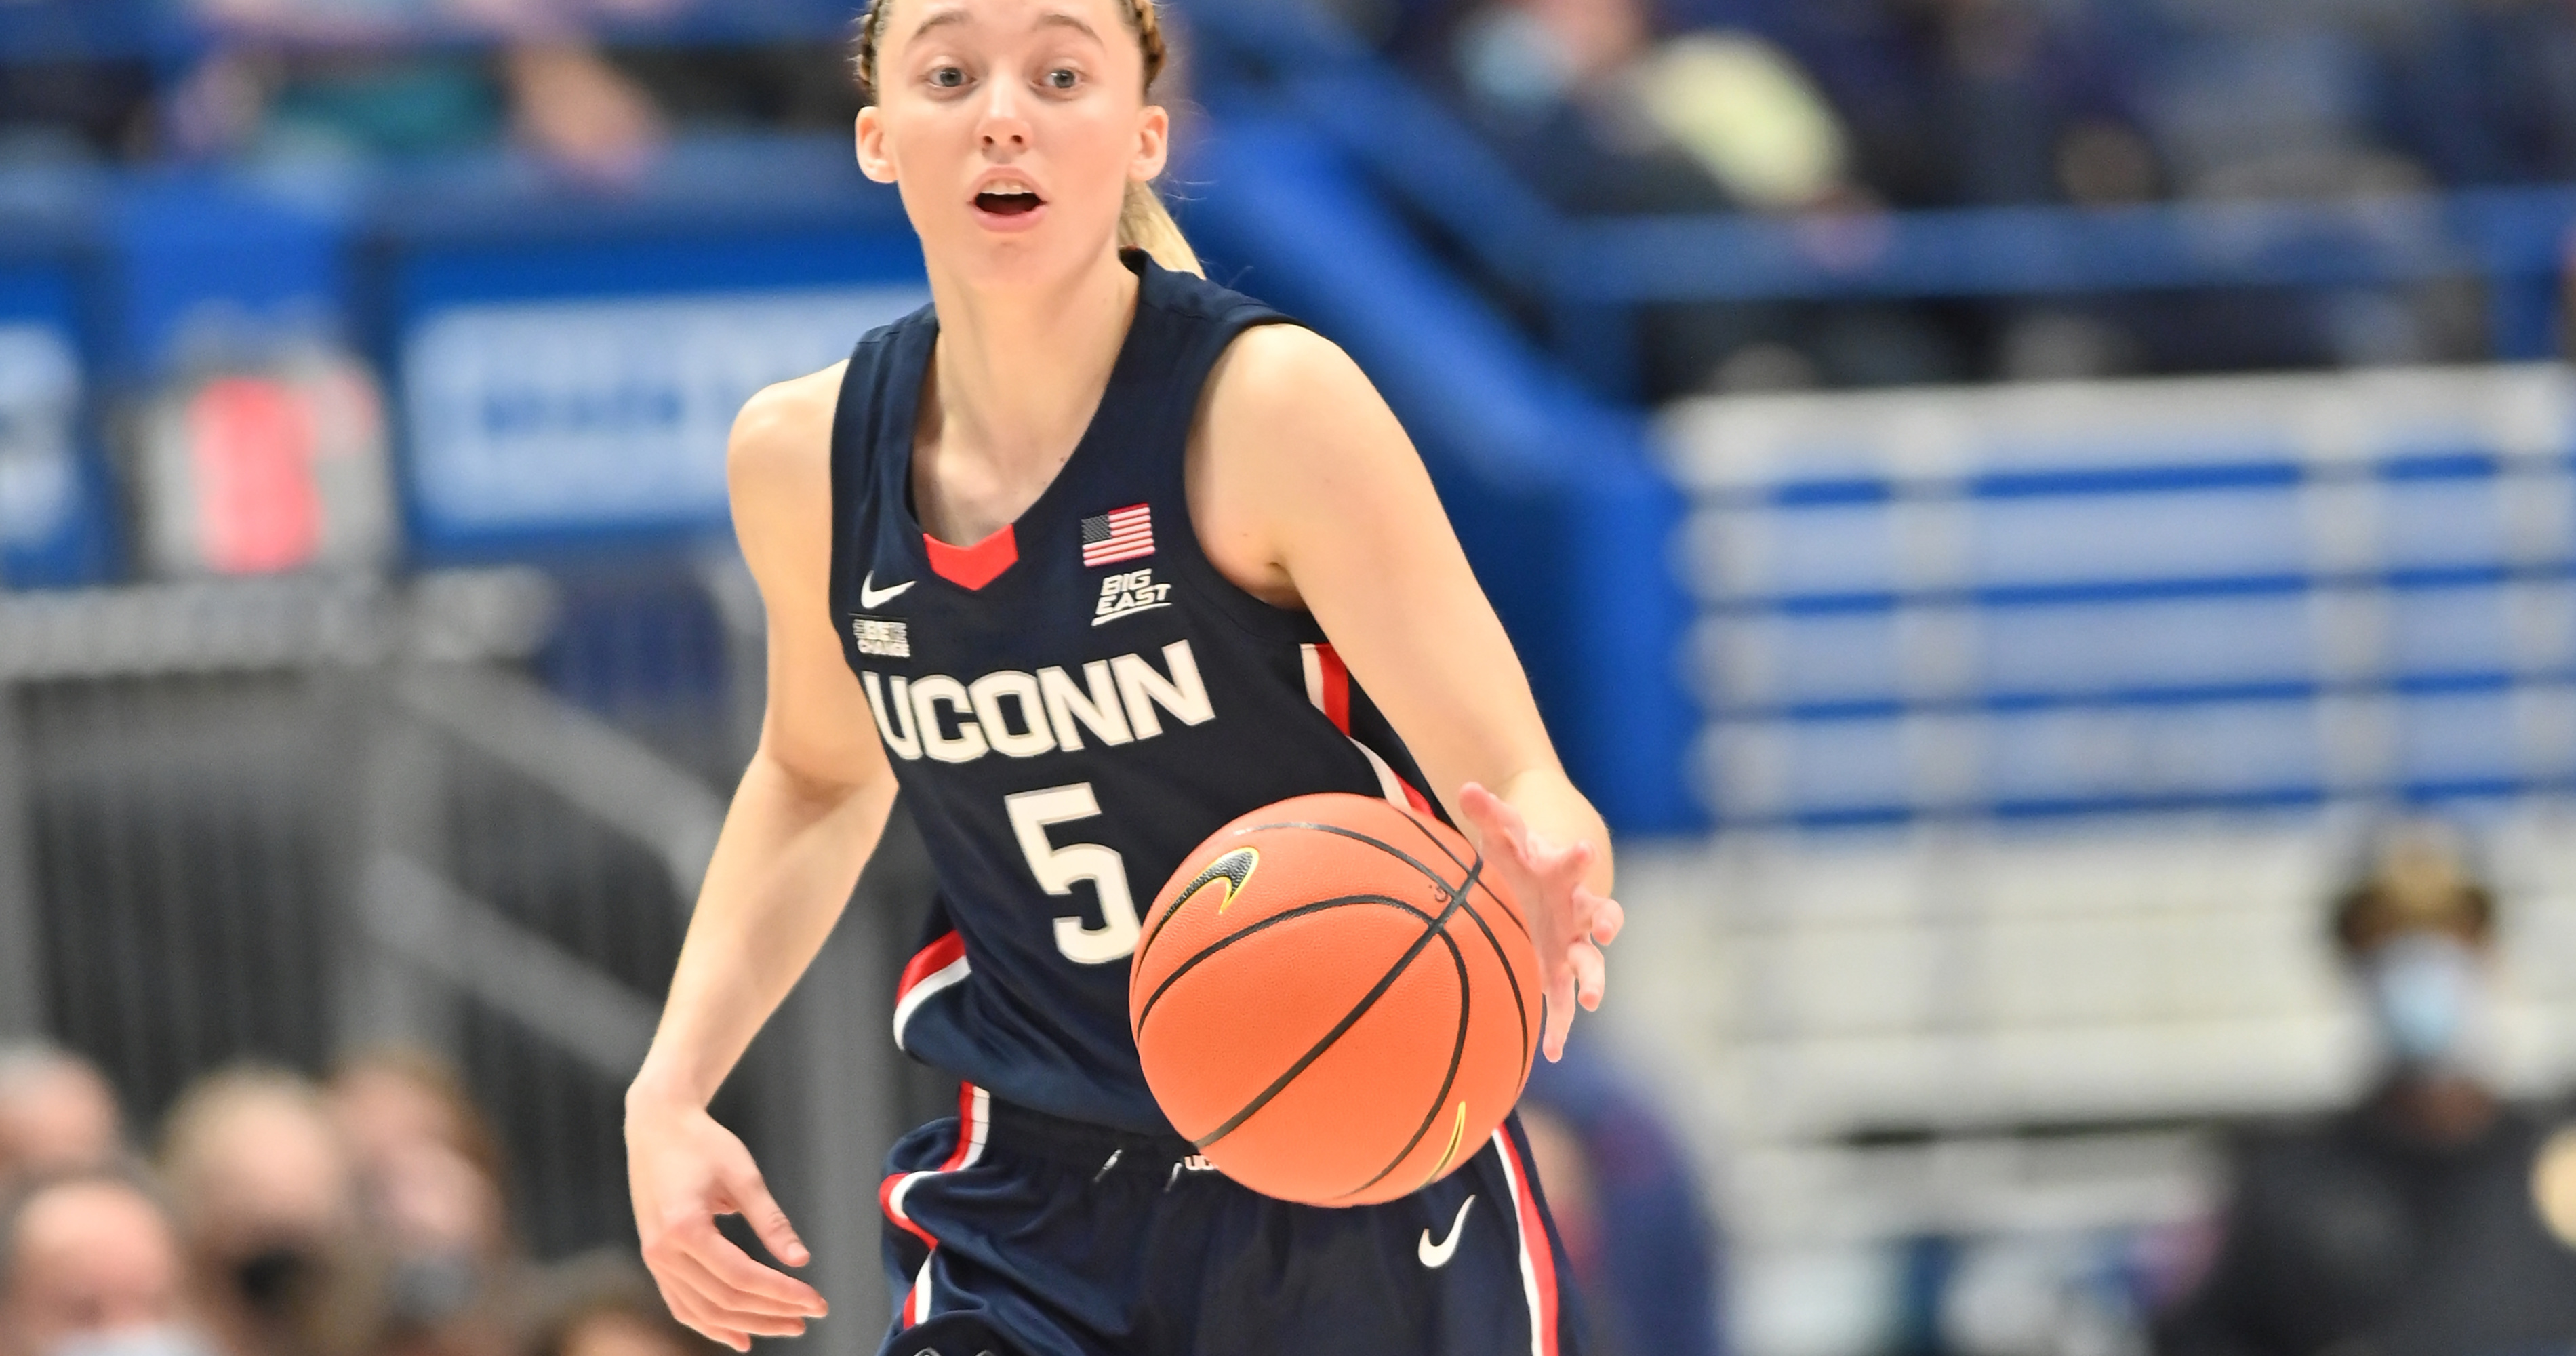 Geno Auriemma Says Paige Bueckers Wasn't 'Any Good' in UConn's Loss to ...